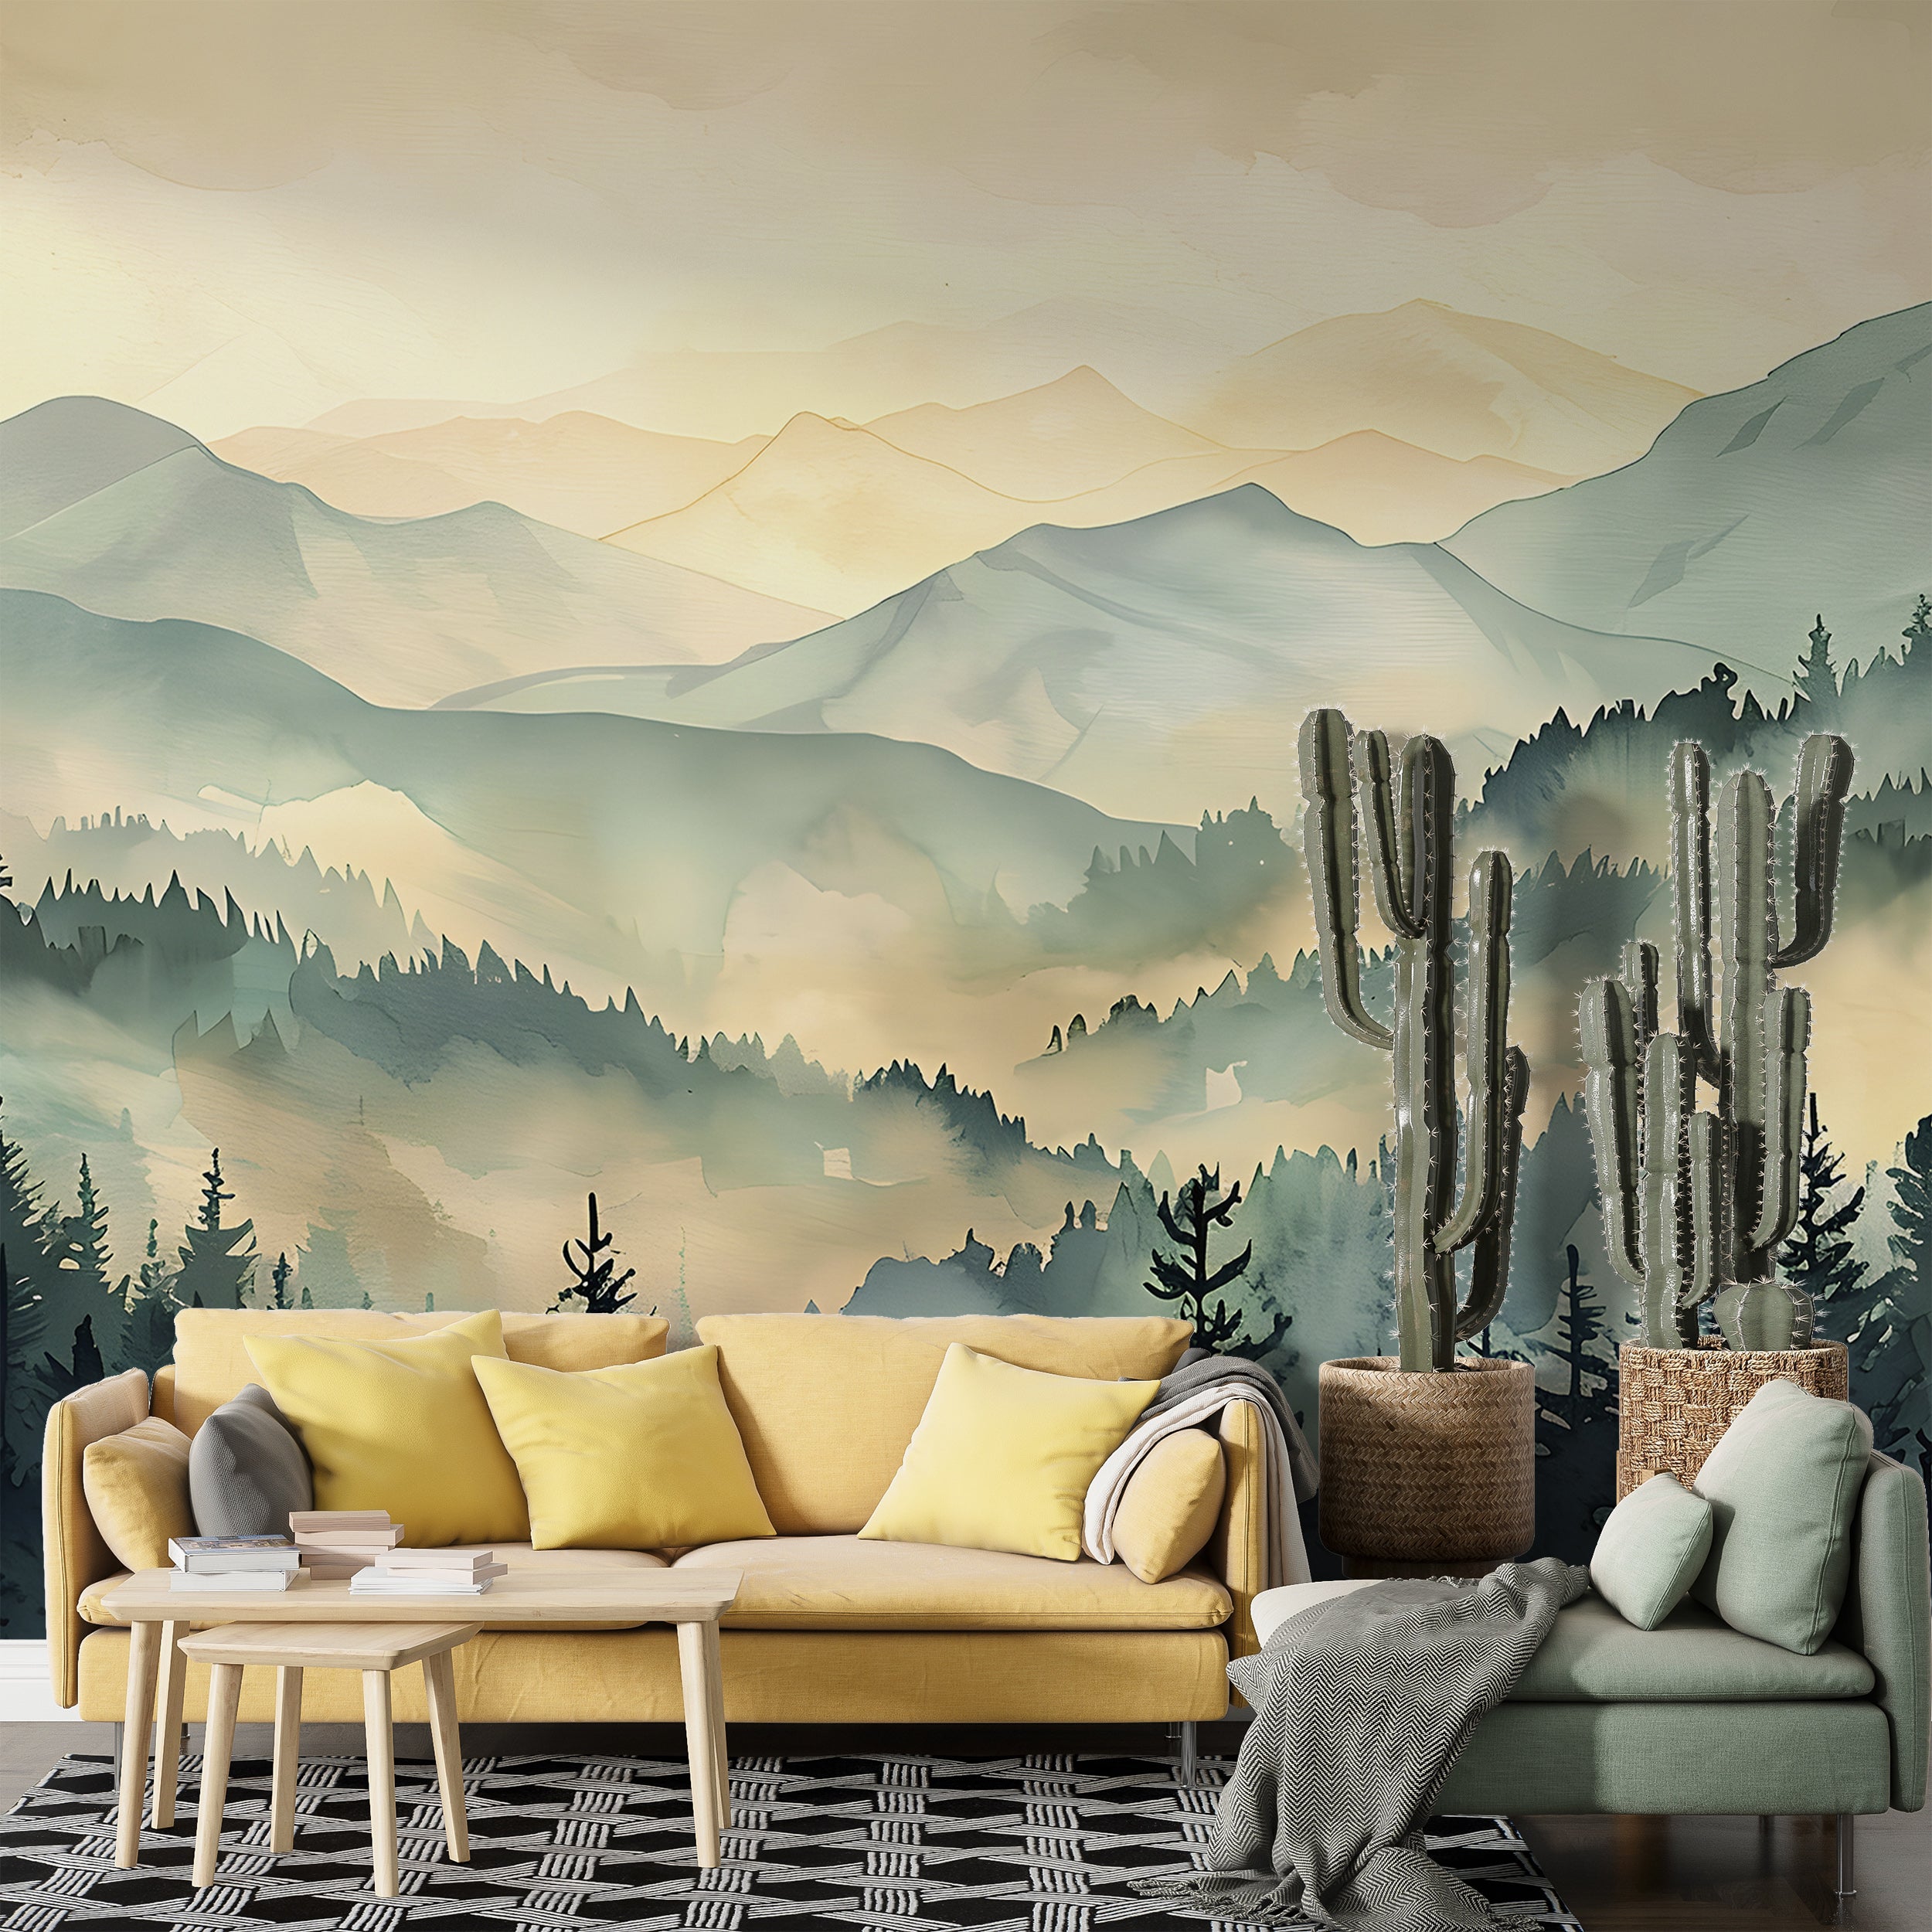 Green and Beige Mountains Landscape Mural, Watercolor Pine Forest and Mountain Wallpaper, Self-adhesive Removable Foggy Nature Decor